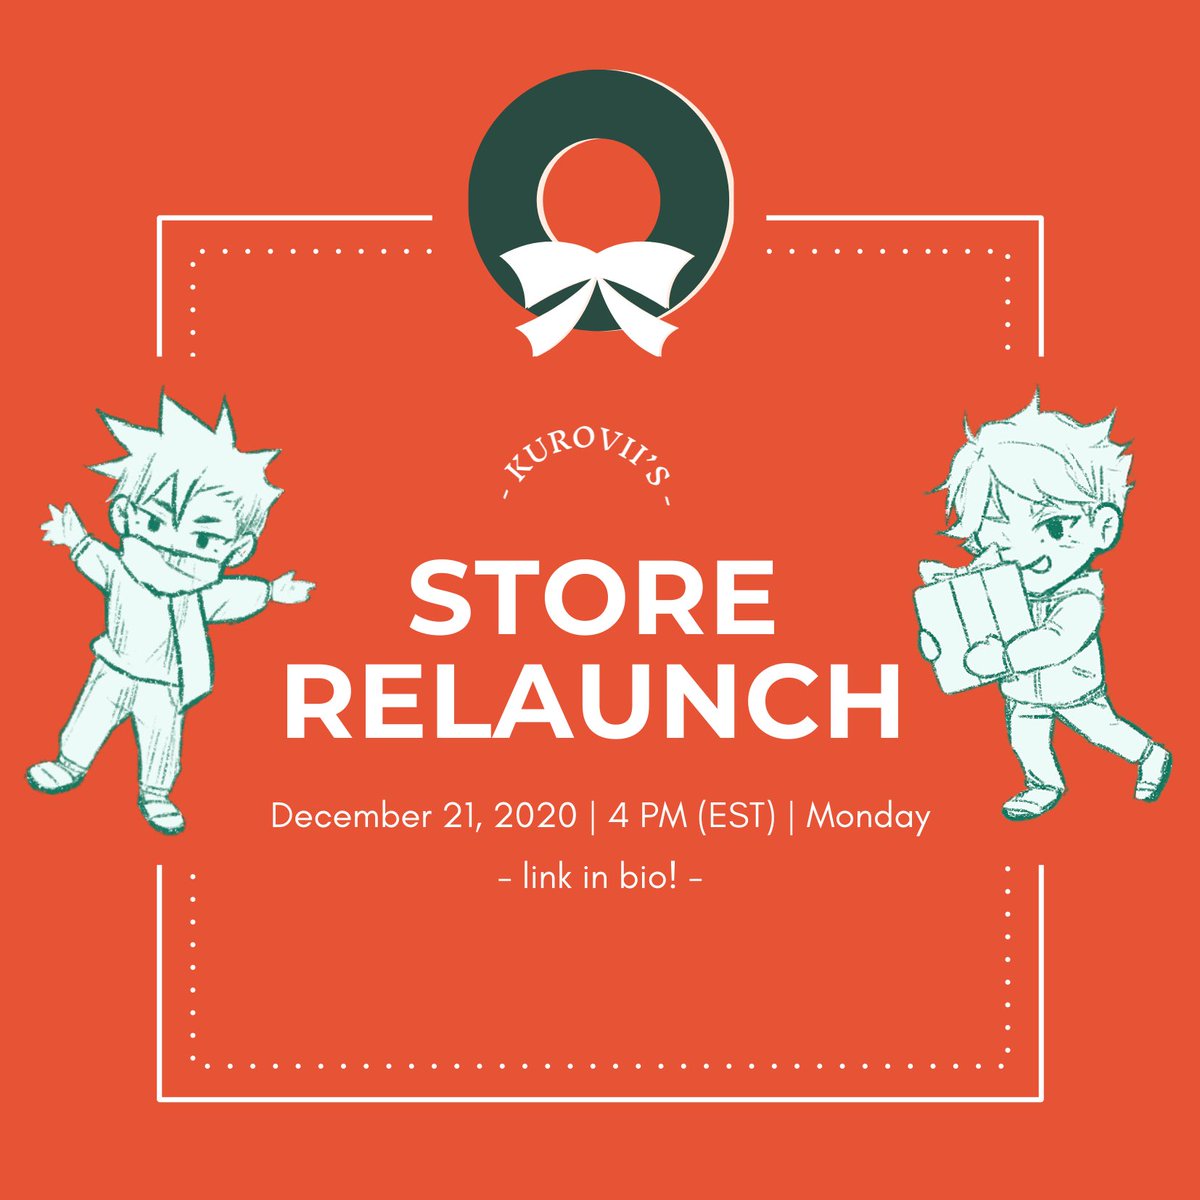 ☃️ STORE RELAUNCH!

Super excited to open my shop again for Christmas ? I bought a lot of new prints and am restocking some old ones!

Store: https://t.co/6hUHGpclnb (will open at 4pm EST) 